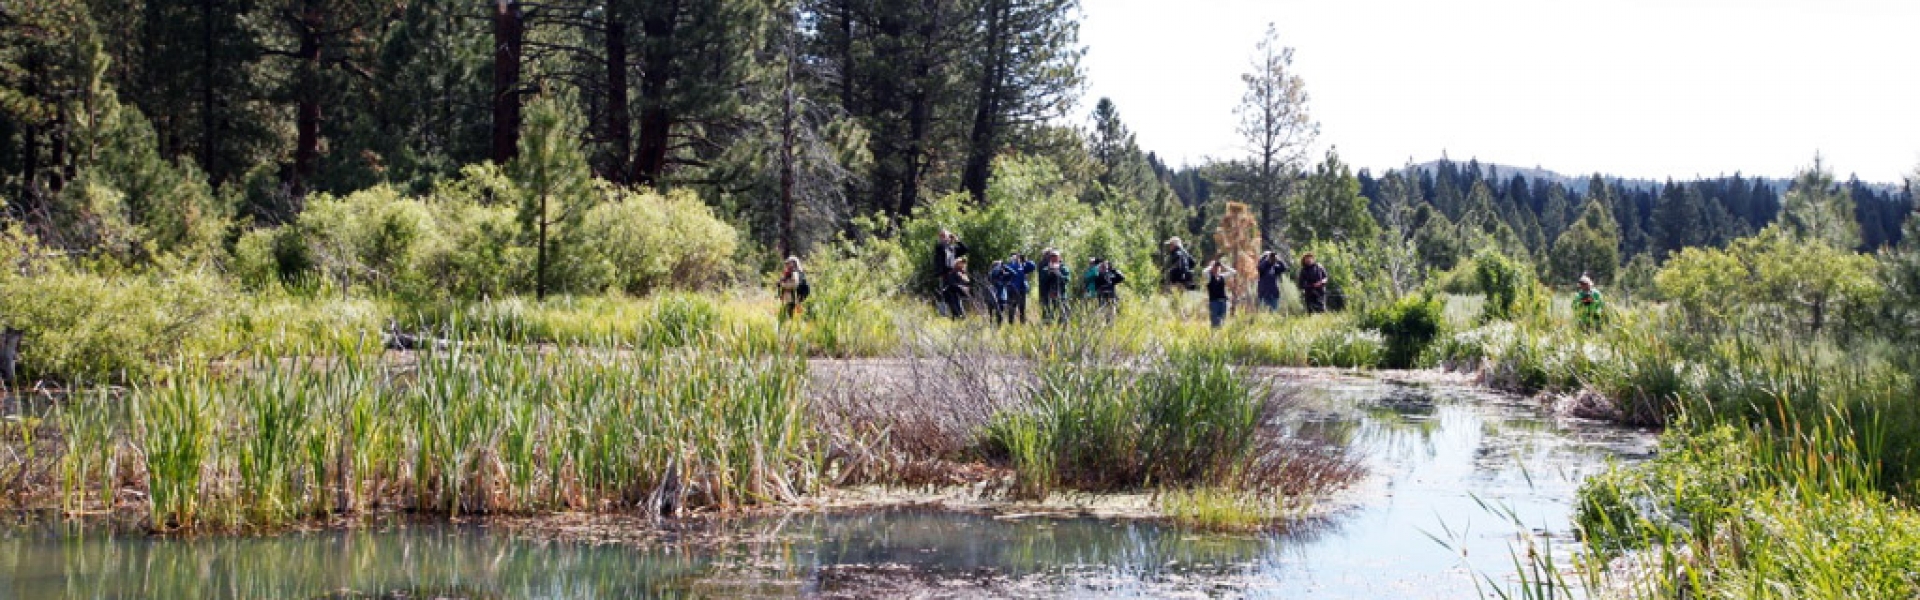 students with binocuclars standing near freshwater pond